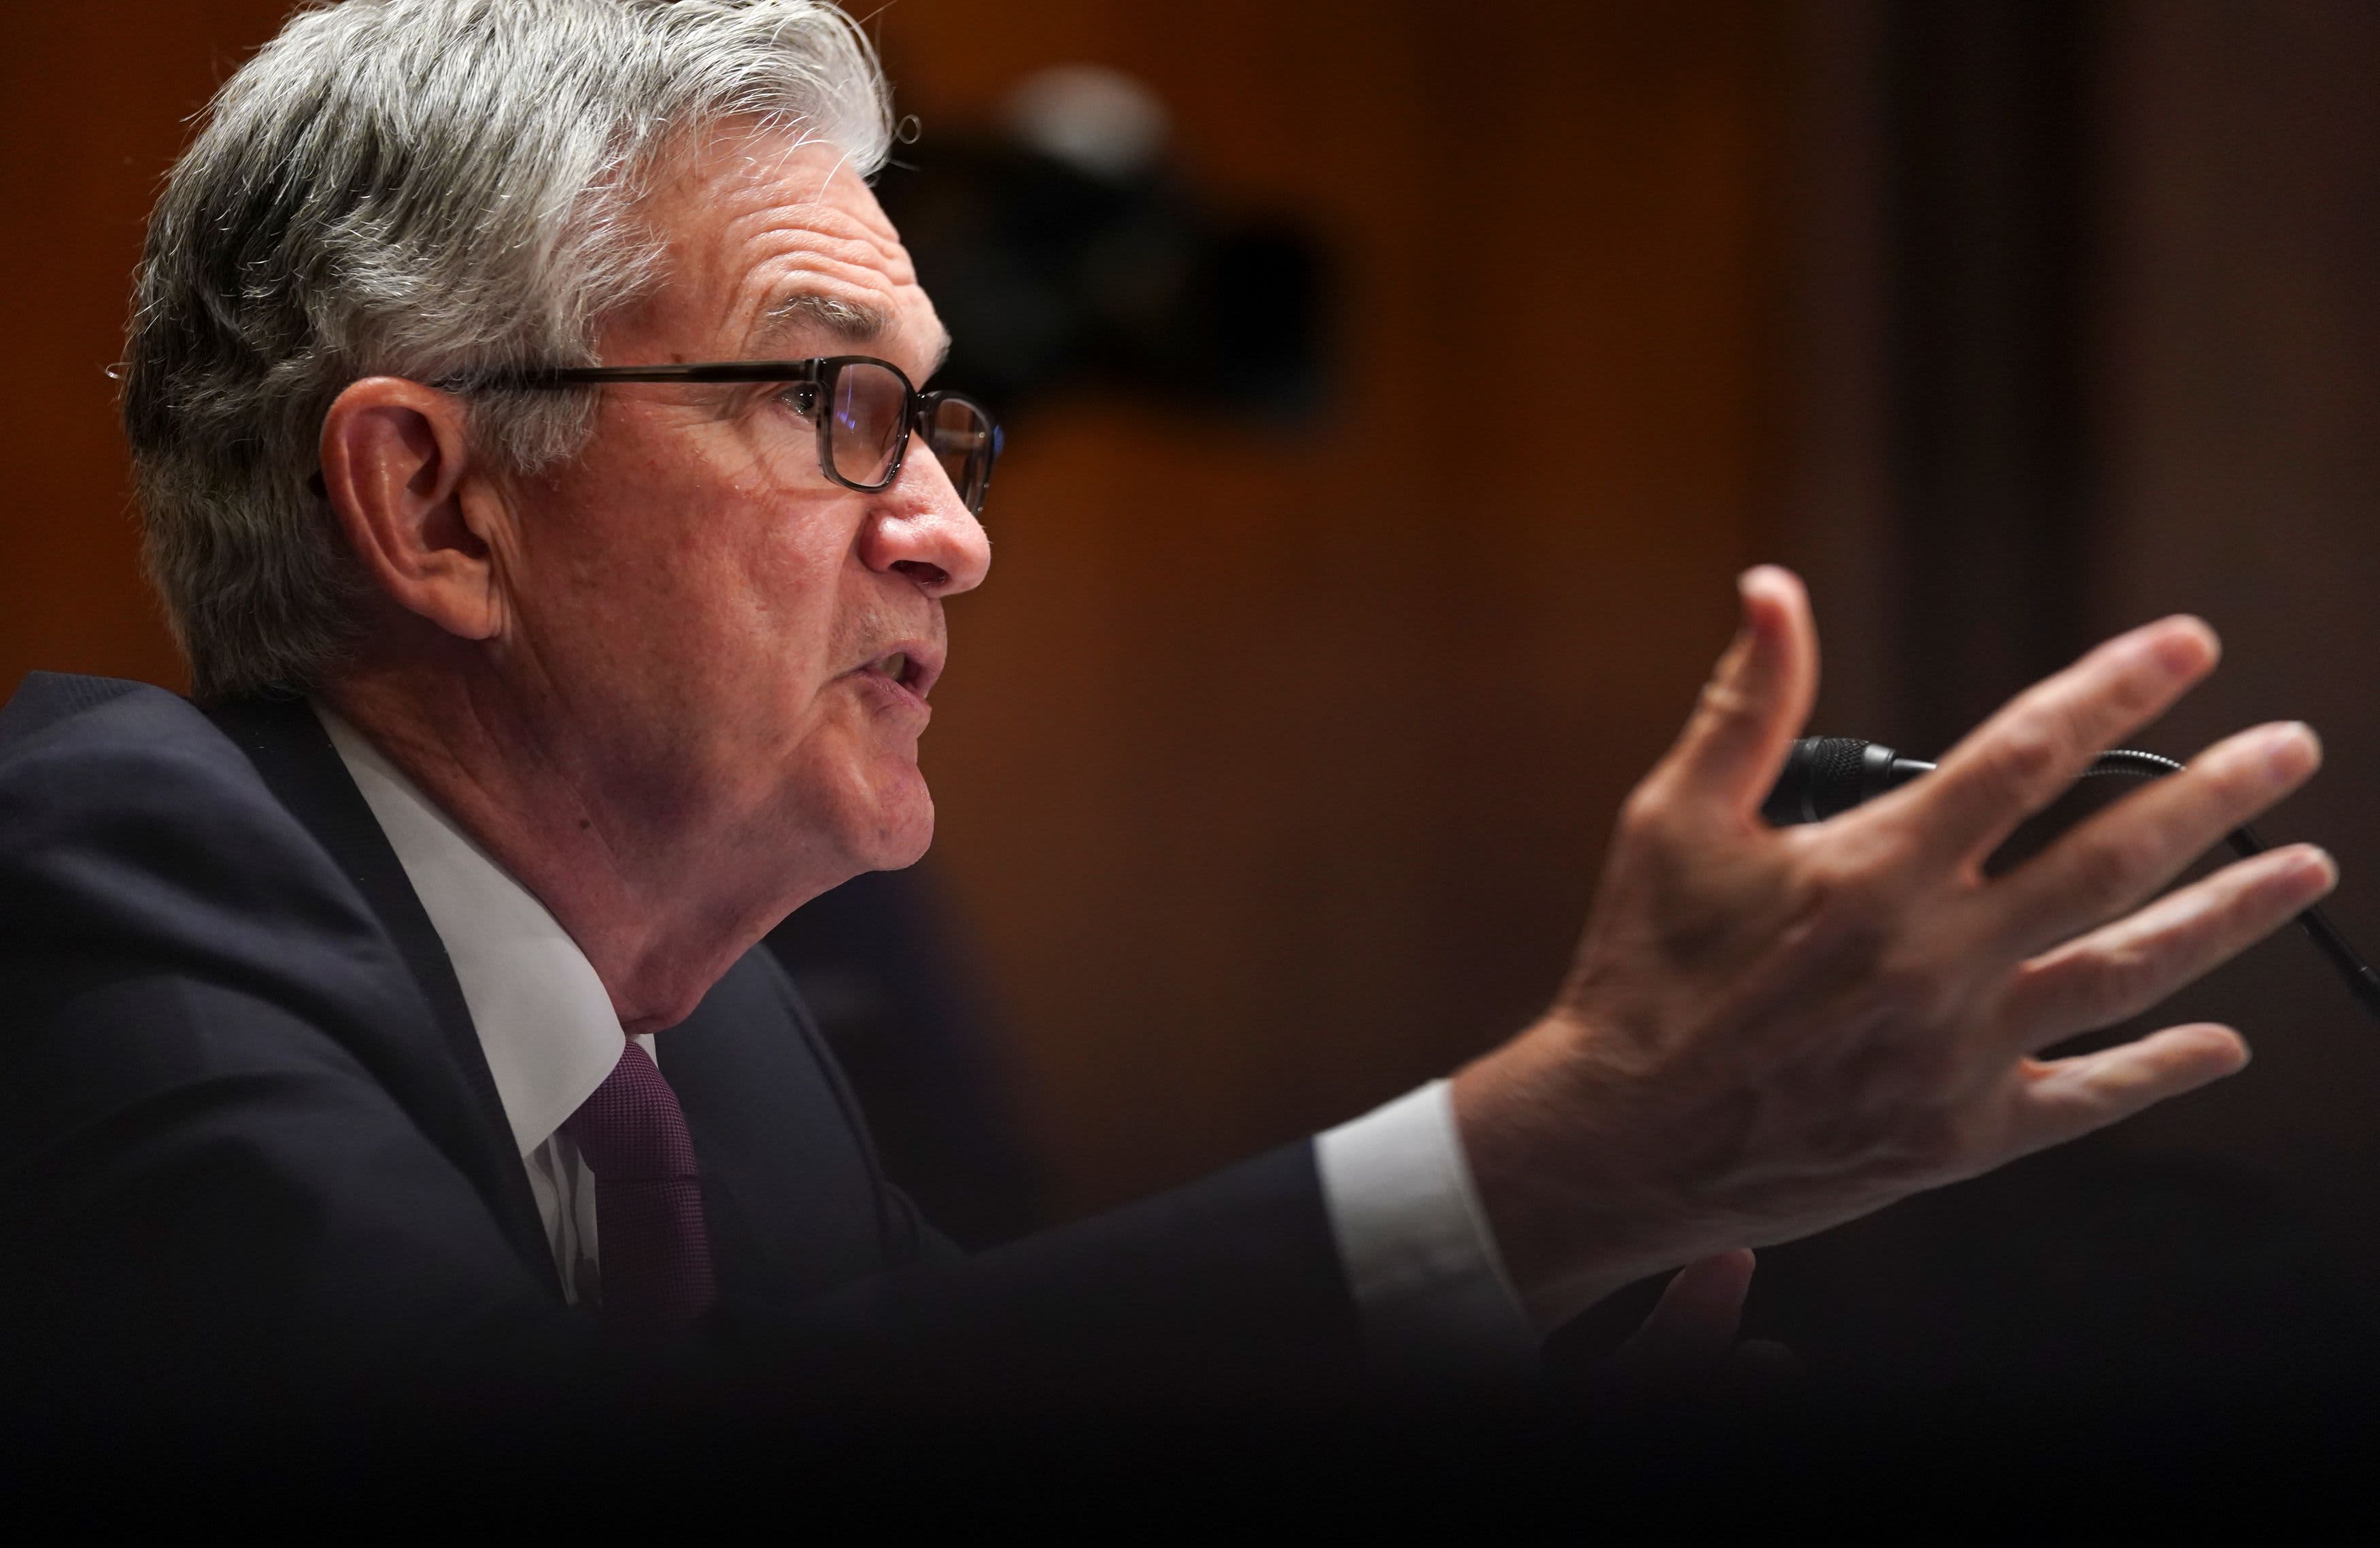 Fed Chief Powell other officials owned securities central bank bought during Covid pandemic – CNBC